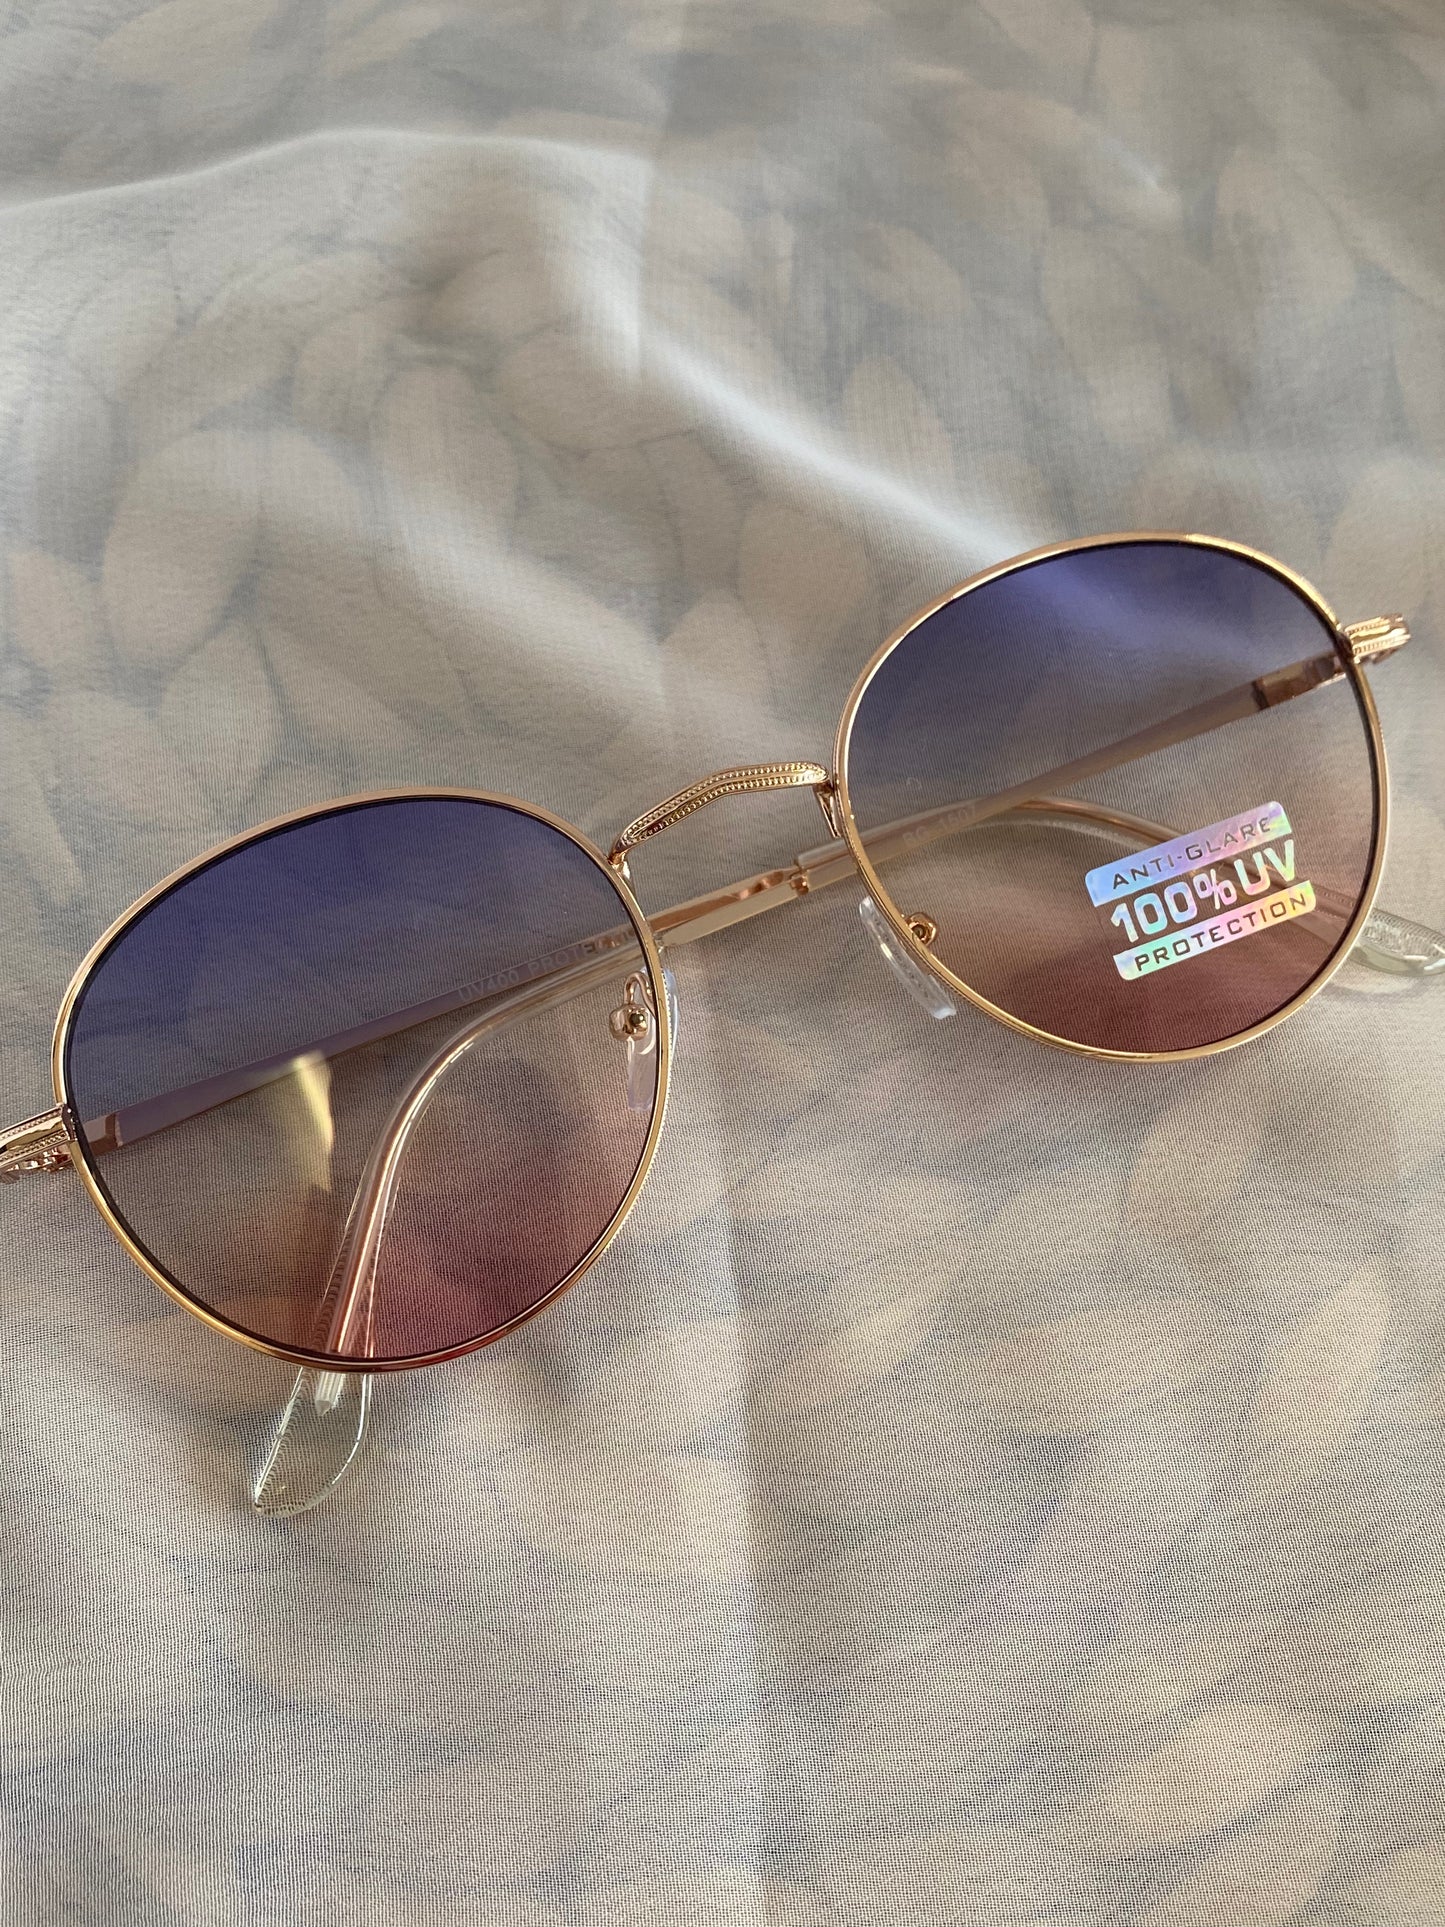 The Rose Collection Sunglasses